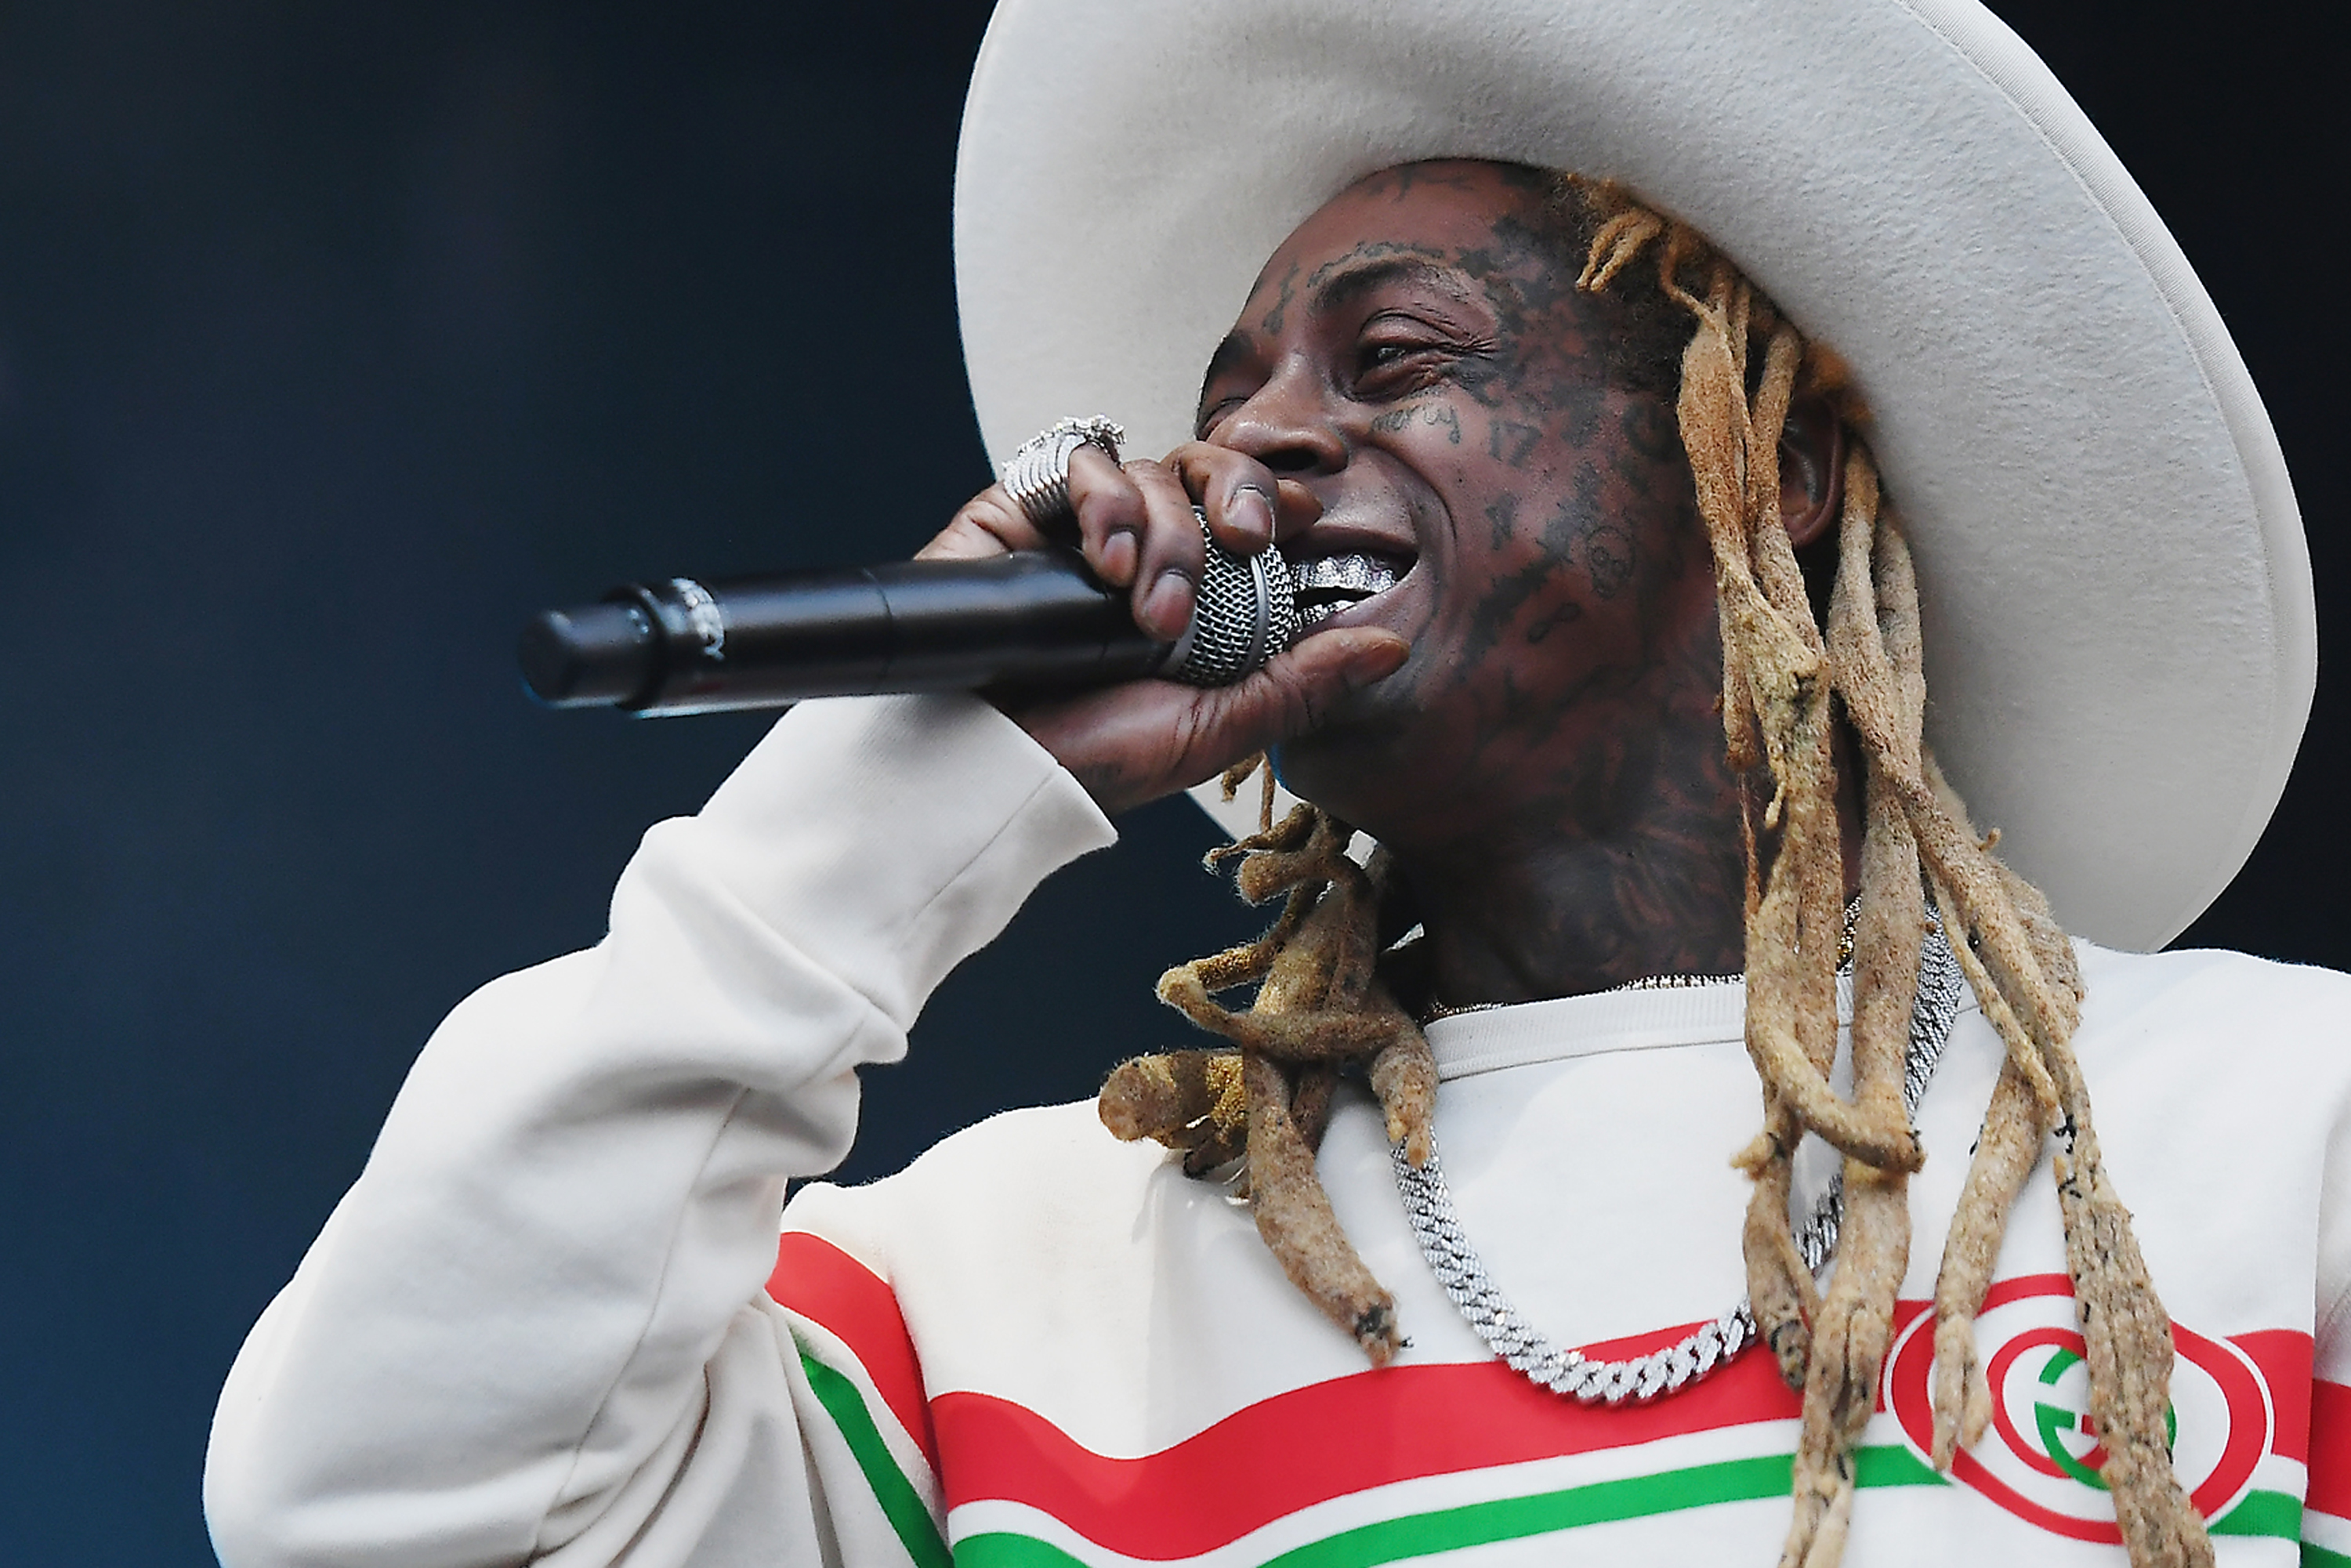 Lil Wayne Calls Out Riyadh For Almost Getting Arrested For Drugs: Report